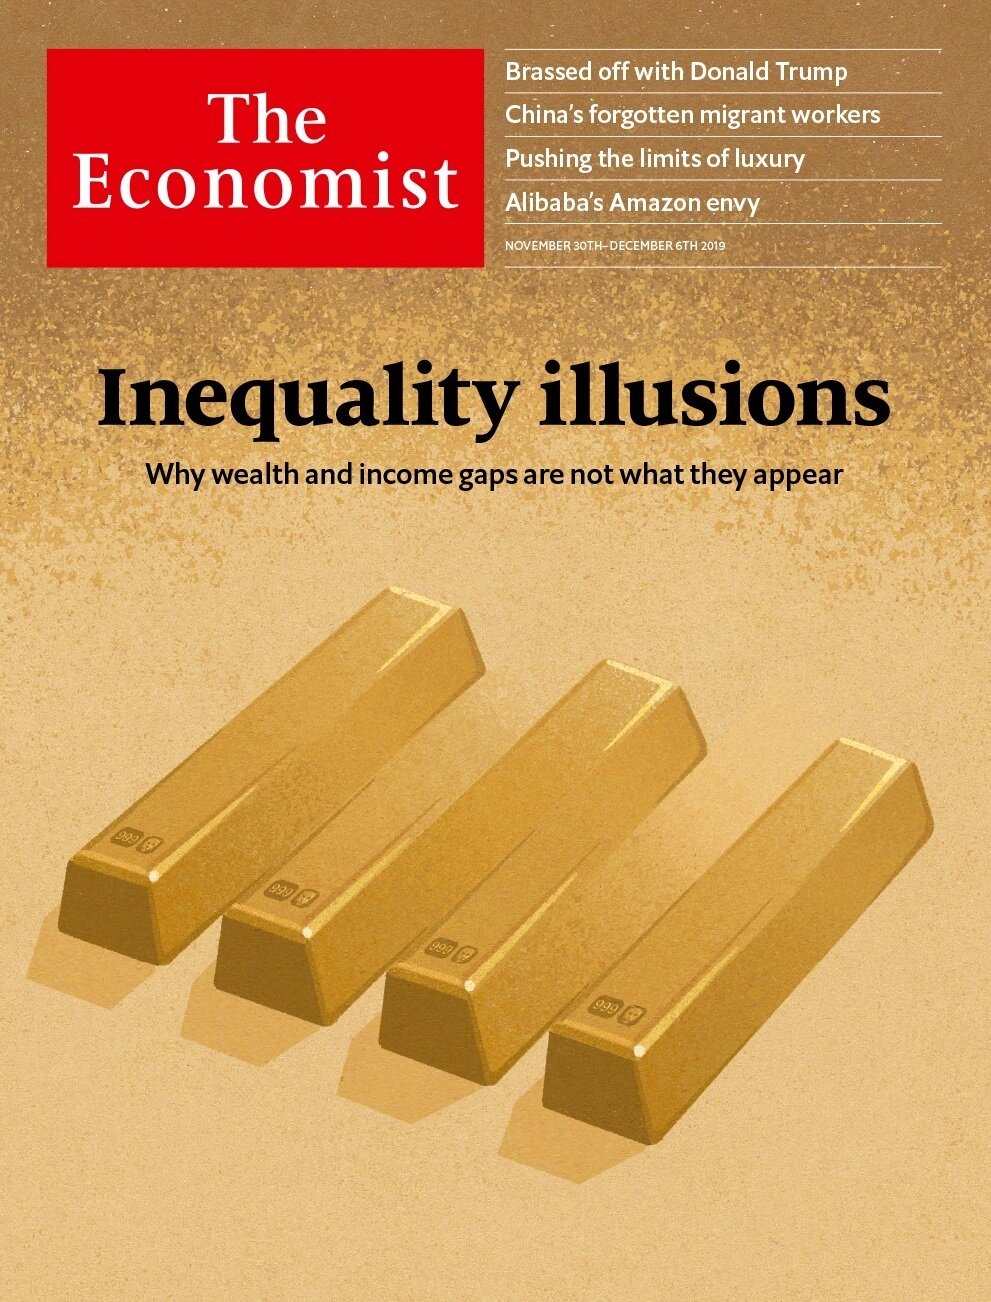 Inequality illusions cover.jpg